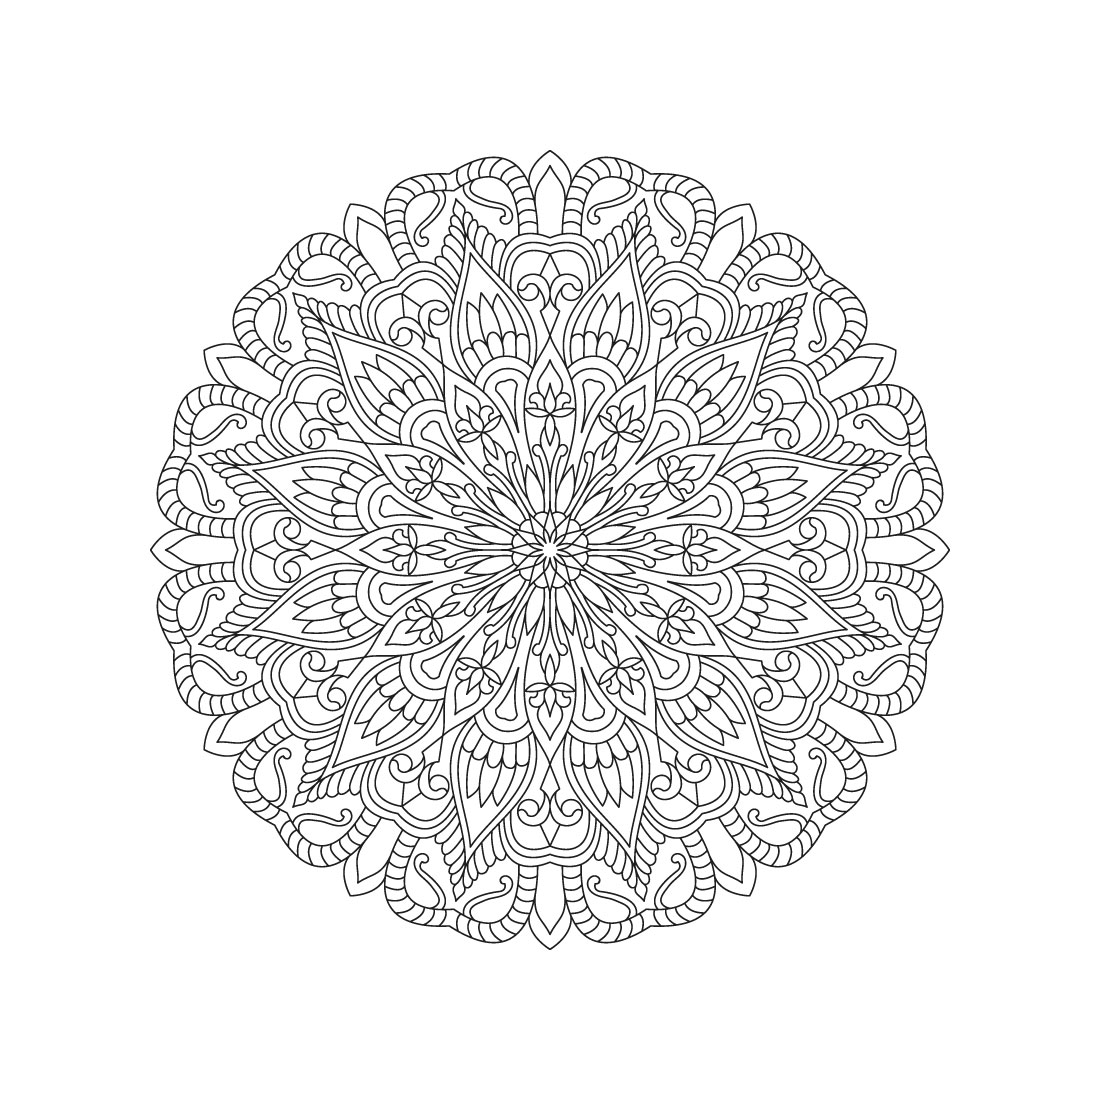 bundle of 10 cosmic delight mandala coloring book pages 04 882